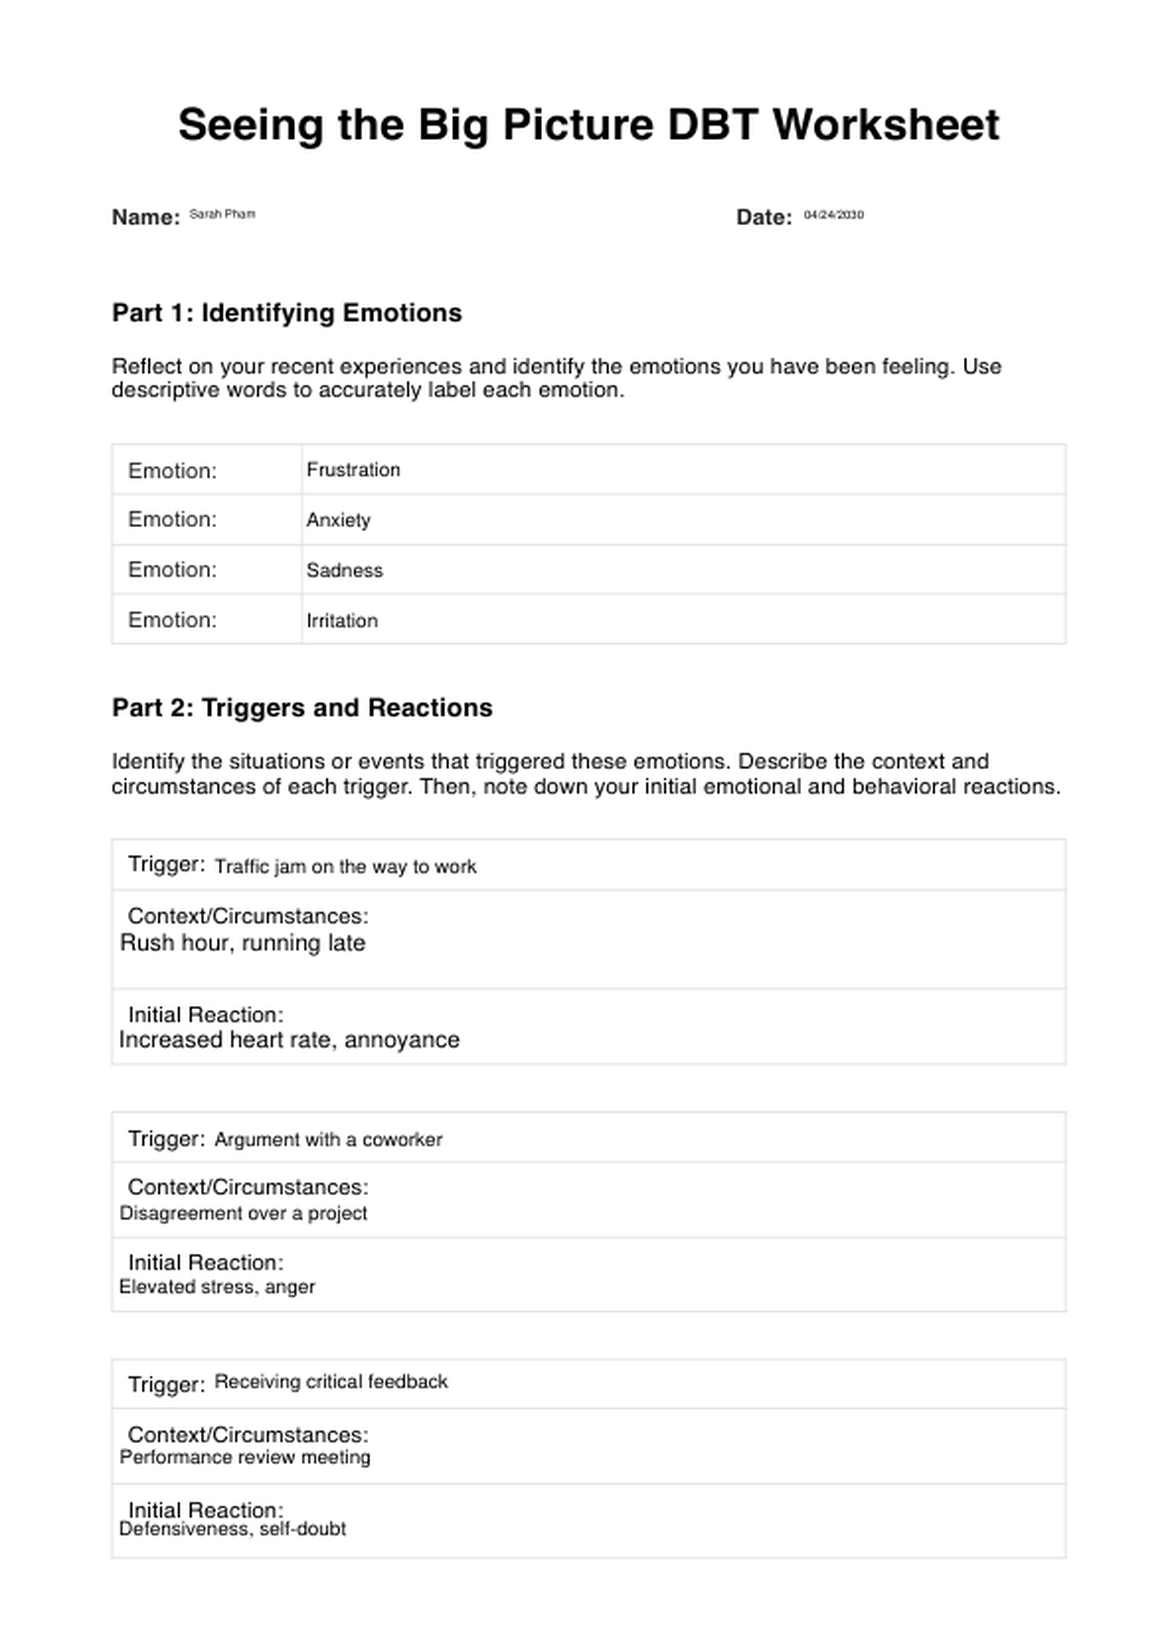 Seeing the Big Picture DBT Worksheet PDF Example